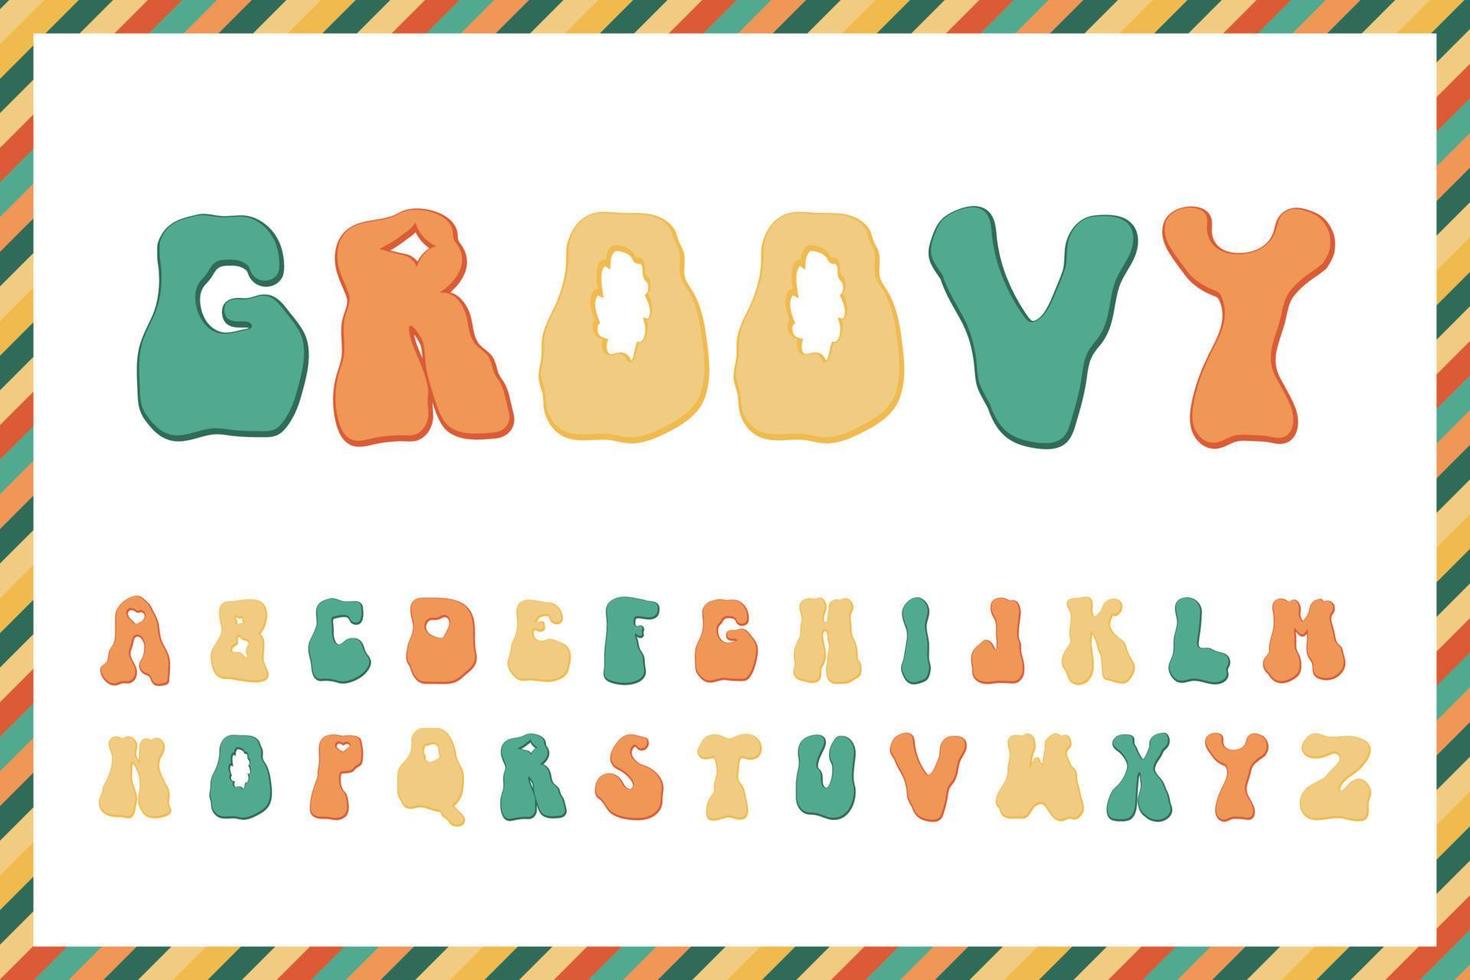 Groovy rave alphabet font in vector. Trippy letters clipart isolated cartoon art. Trendy freaky doodle psychedelic text. Hippie rainbow groove slogan symbol. Wavy funky groove nostalgia graphic vector